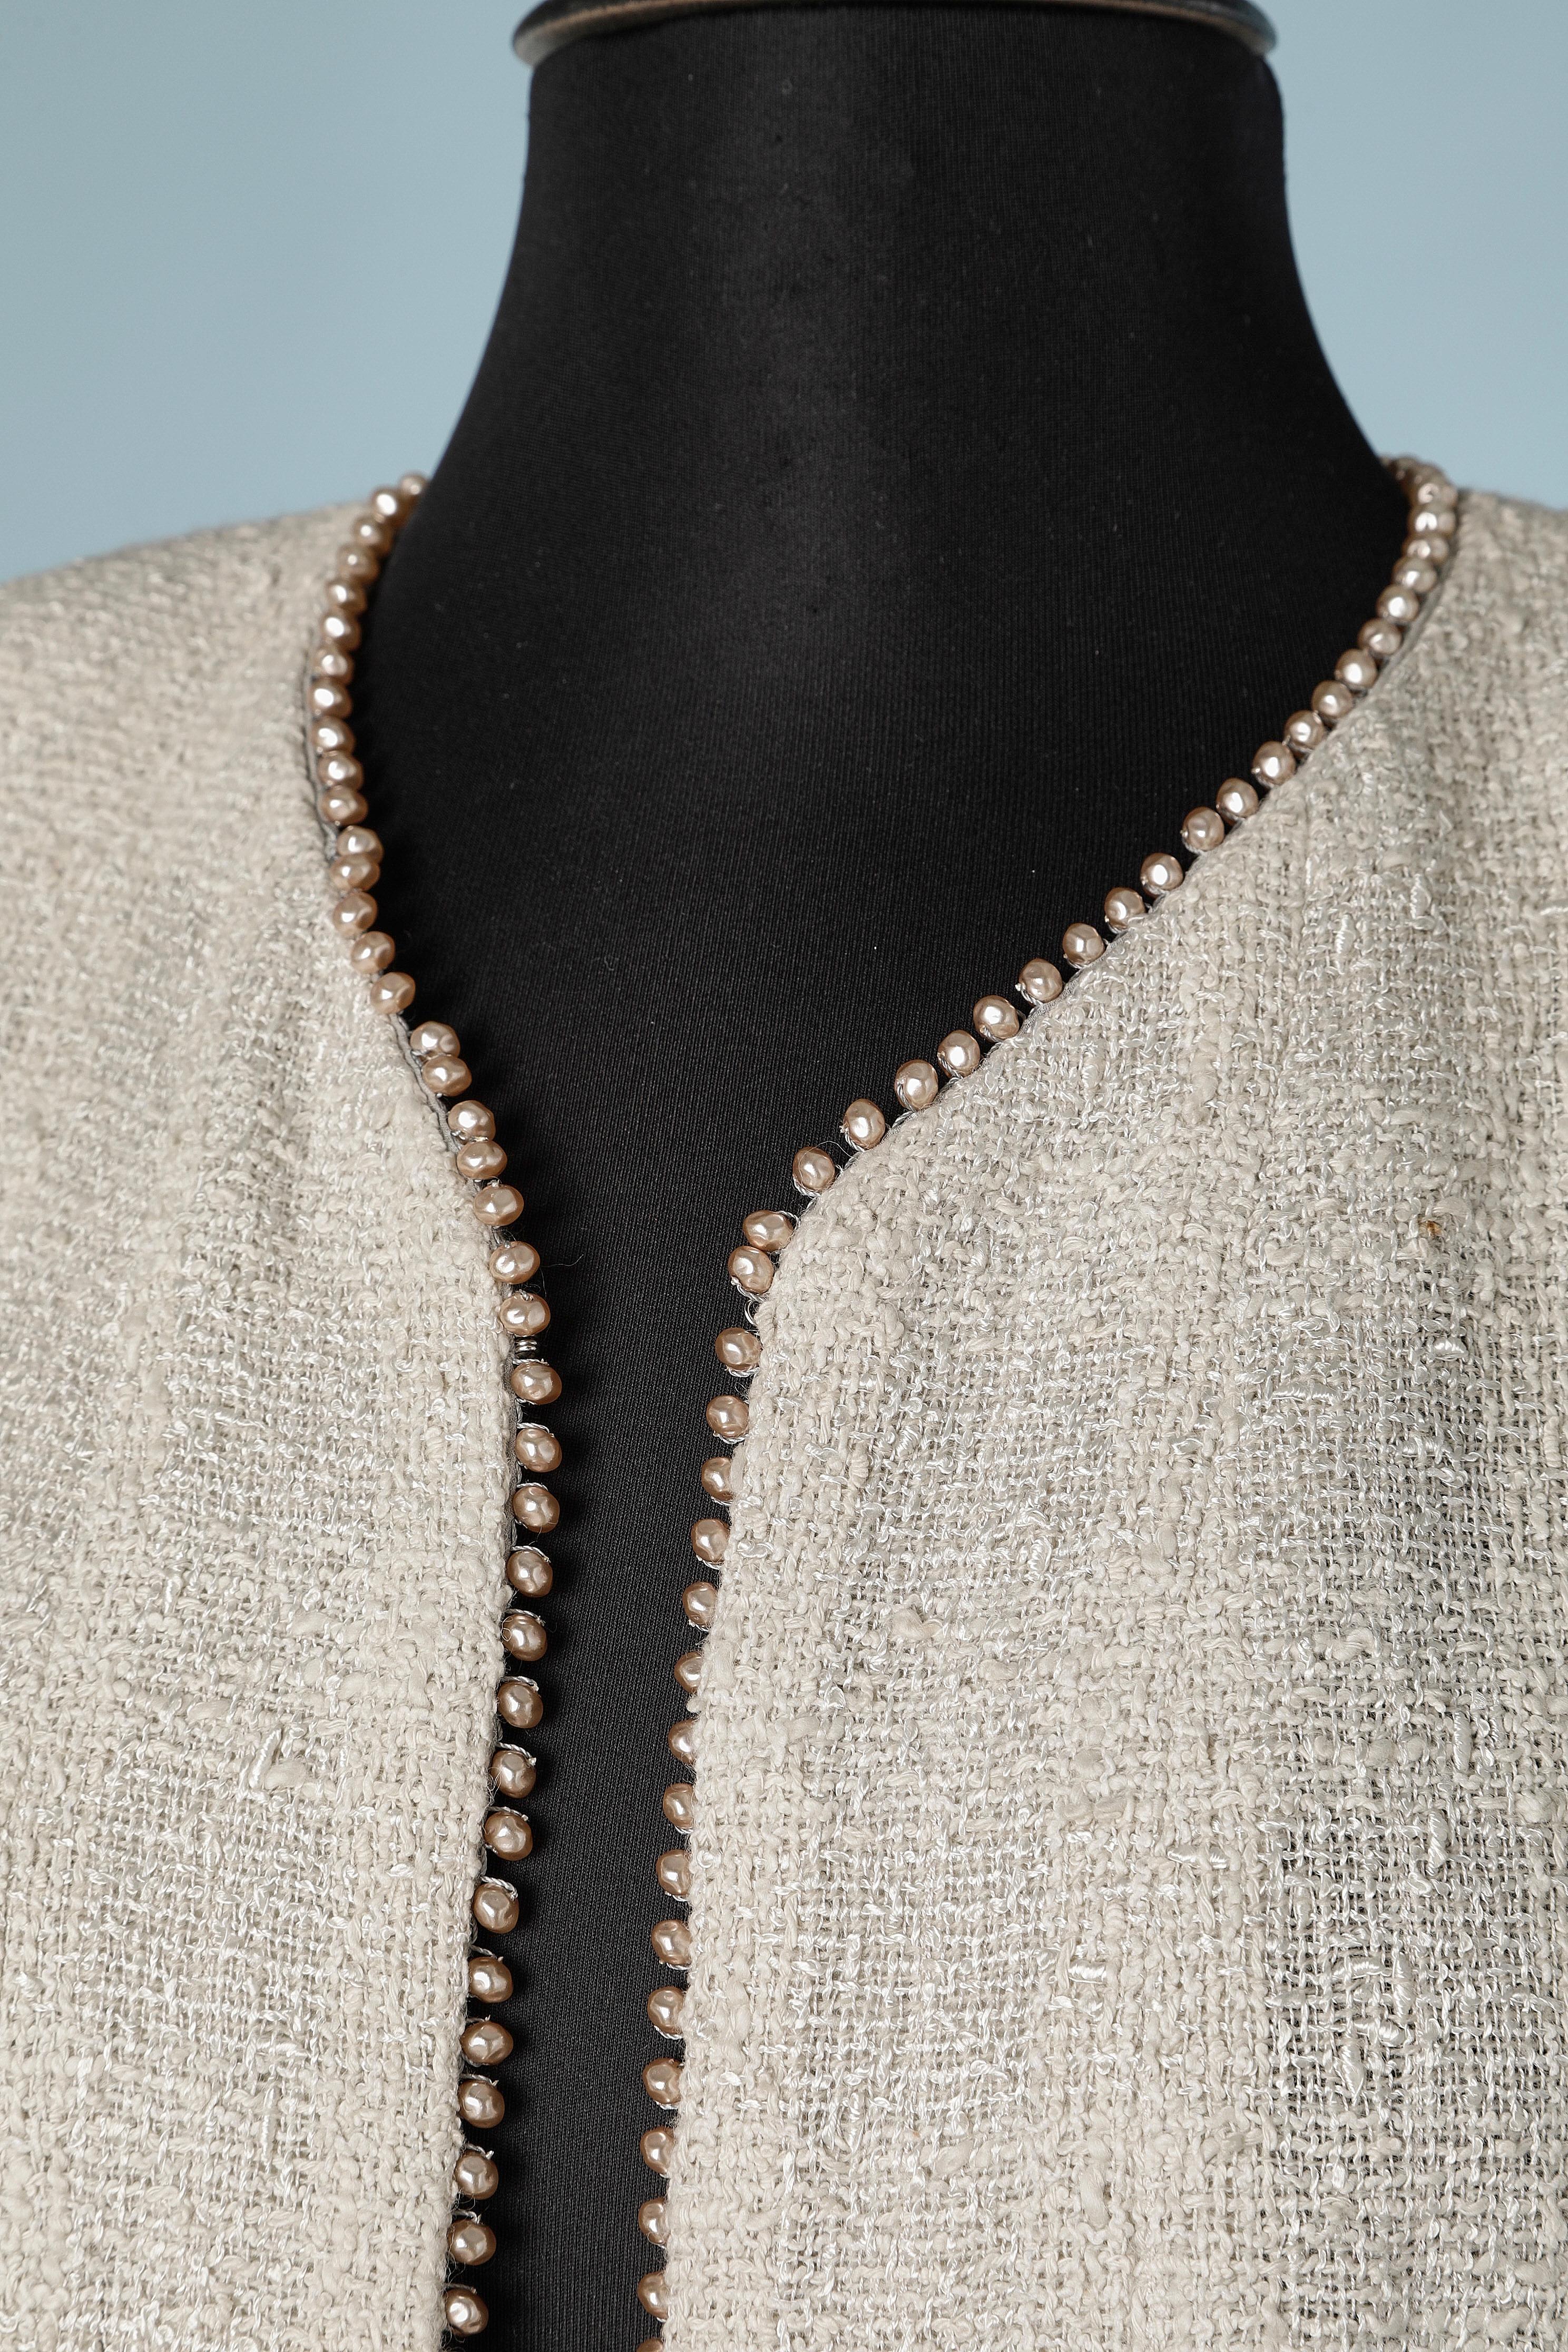 Grey tweed jacket with mother of pearls beads on the edge. Cotton lining. 
Shoulder pads. Metallic chain in the inside bottom edge. 
SIZE 42 (L) 